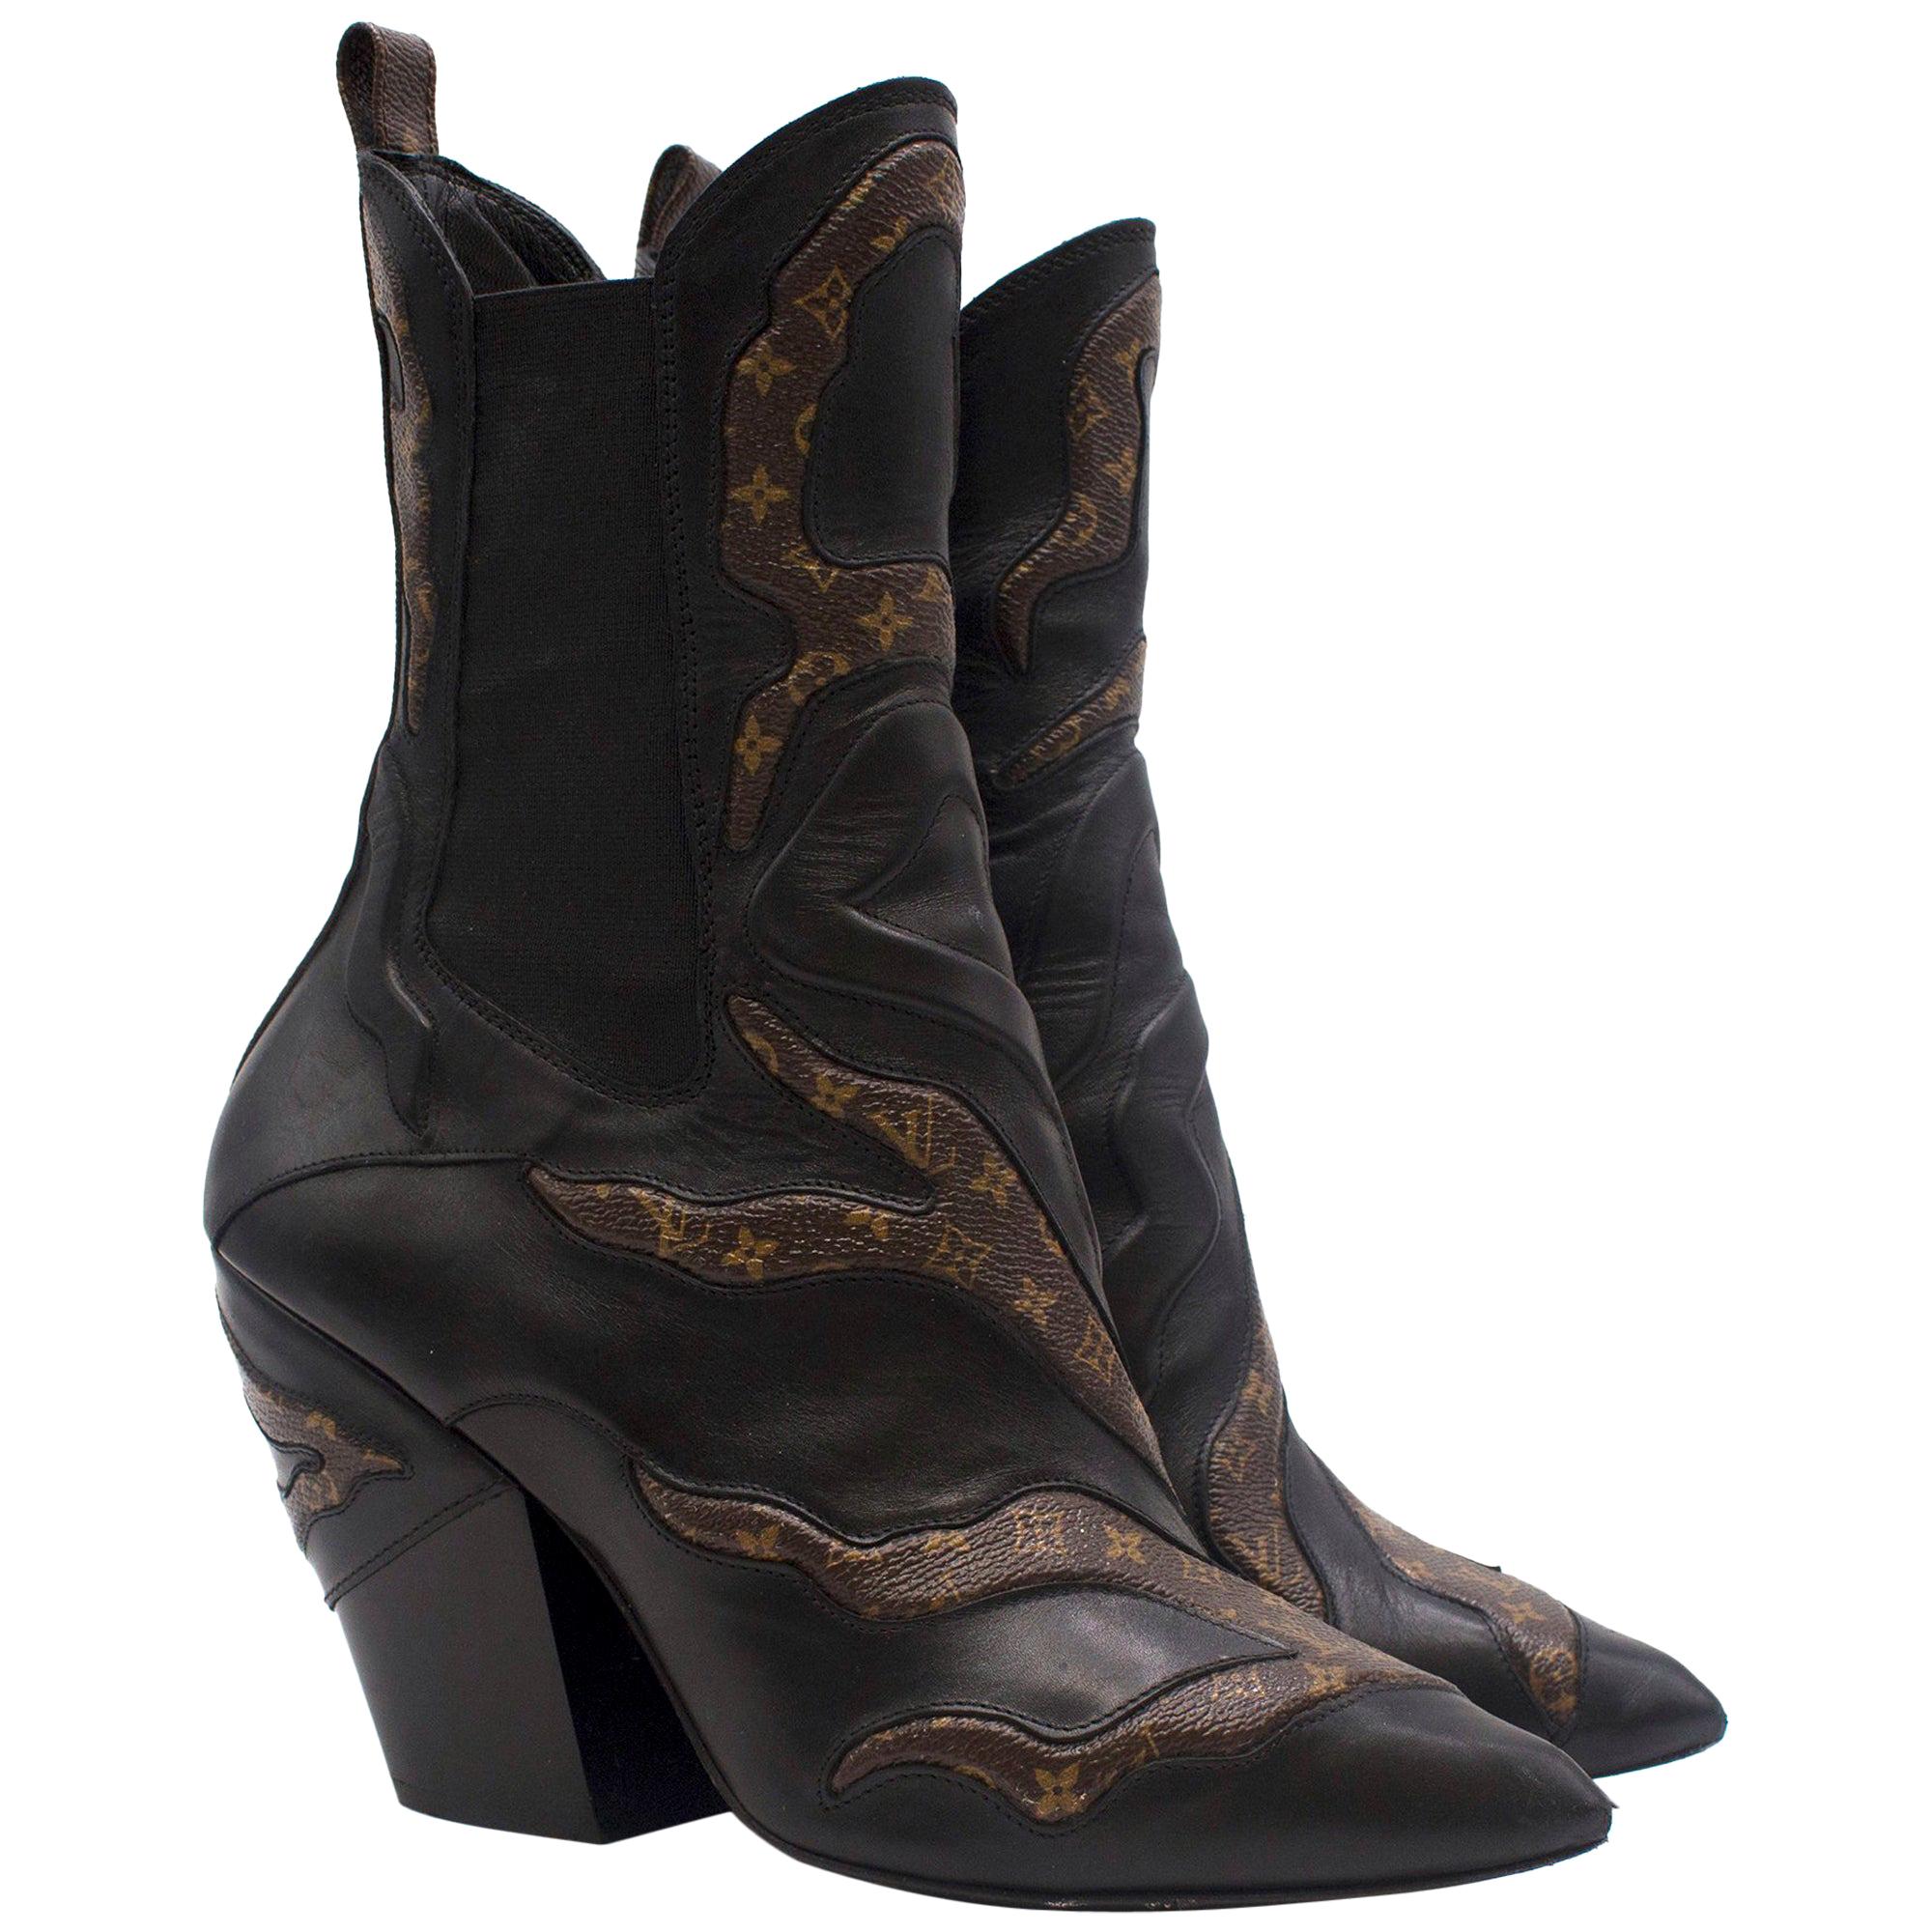 Louis Vuitton, Shoes, New Louis Vuitton Leather Fireball Western Boots  Size 38